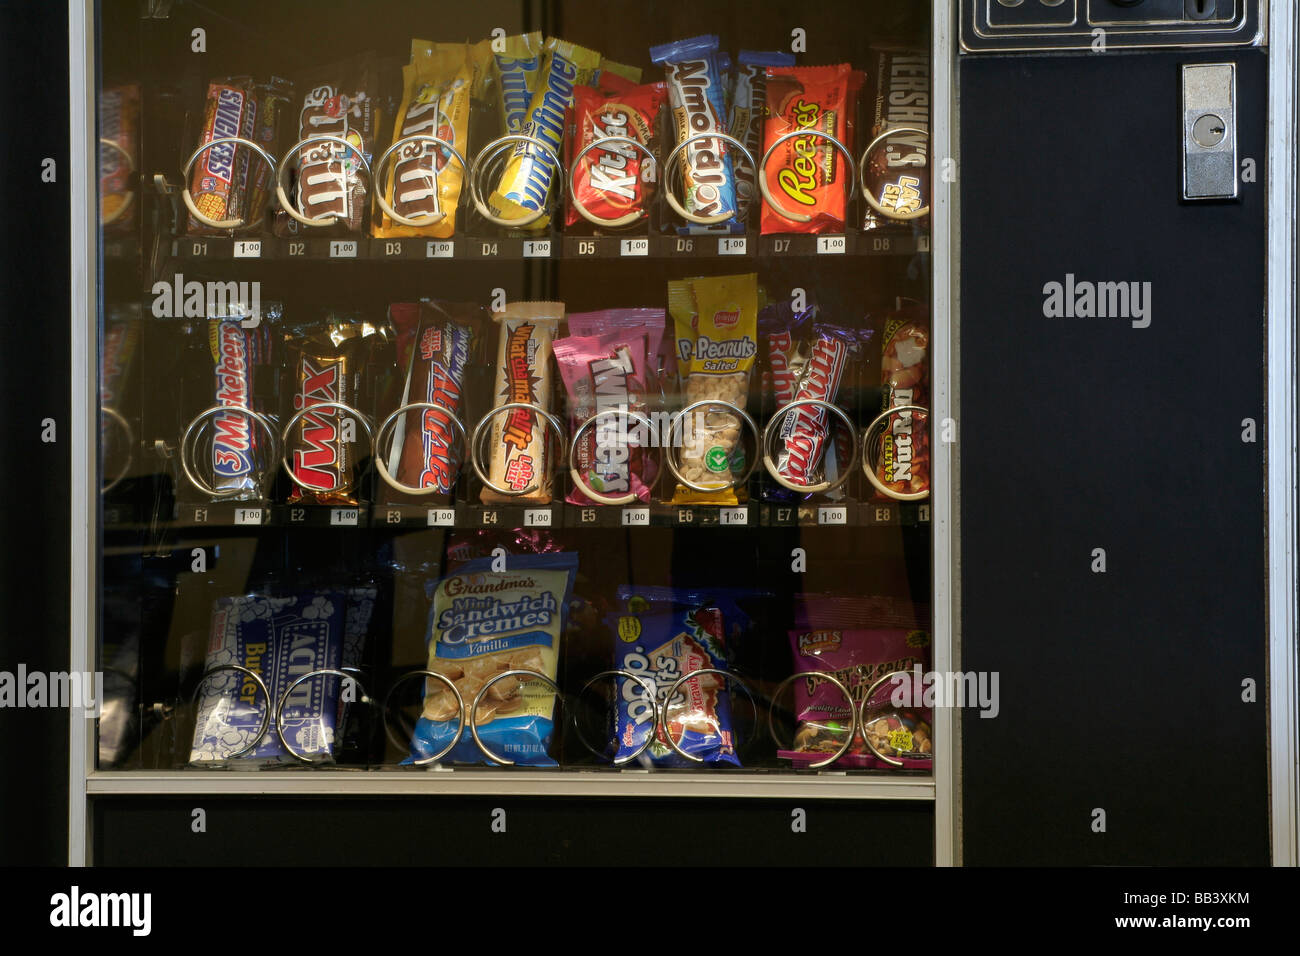 Vending machine filled with snack foods Stock Photo